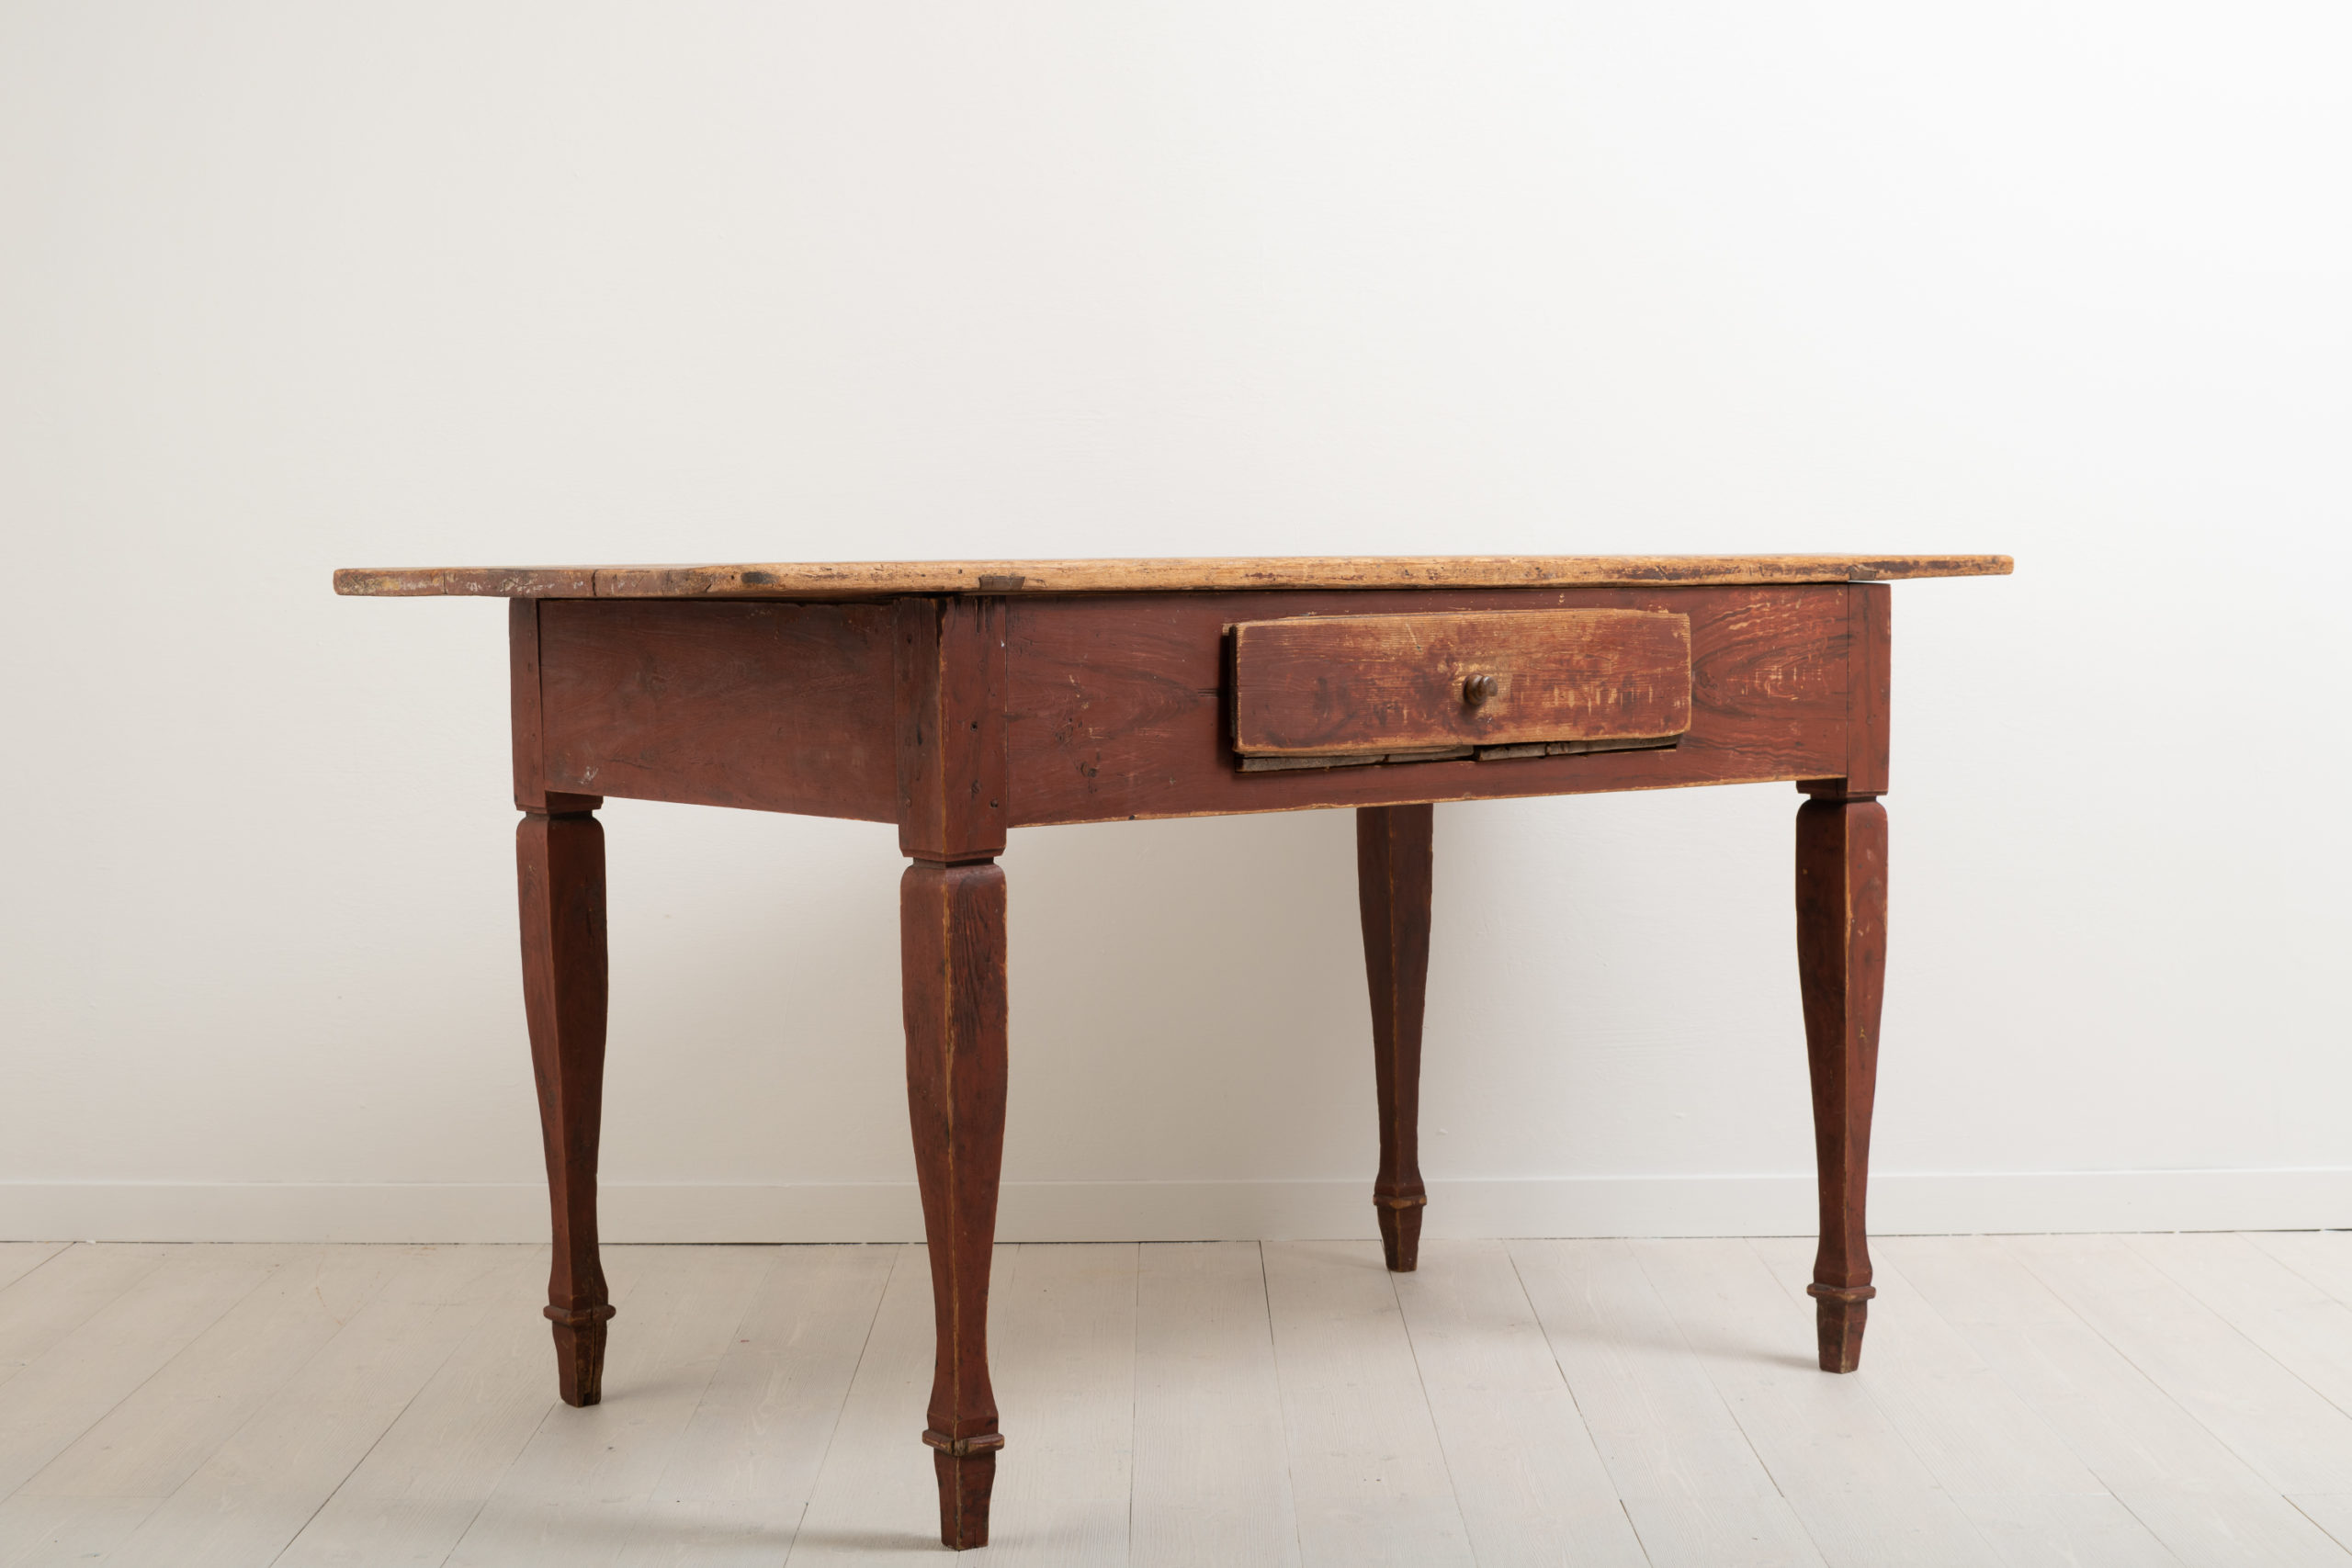 Gustavian Styled Work Table from Norrbotten